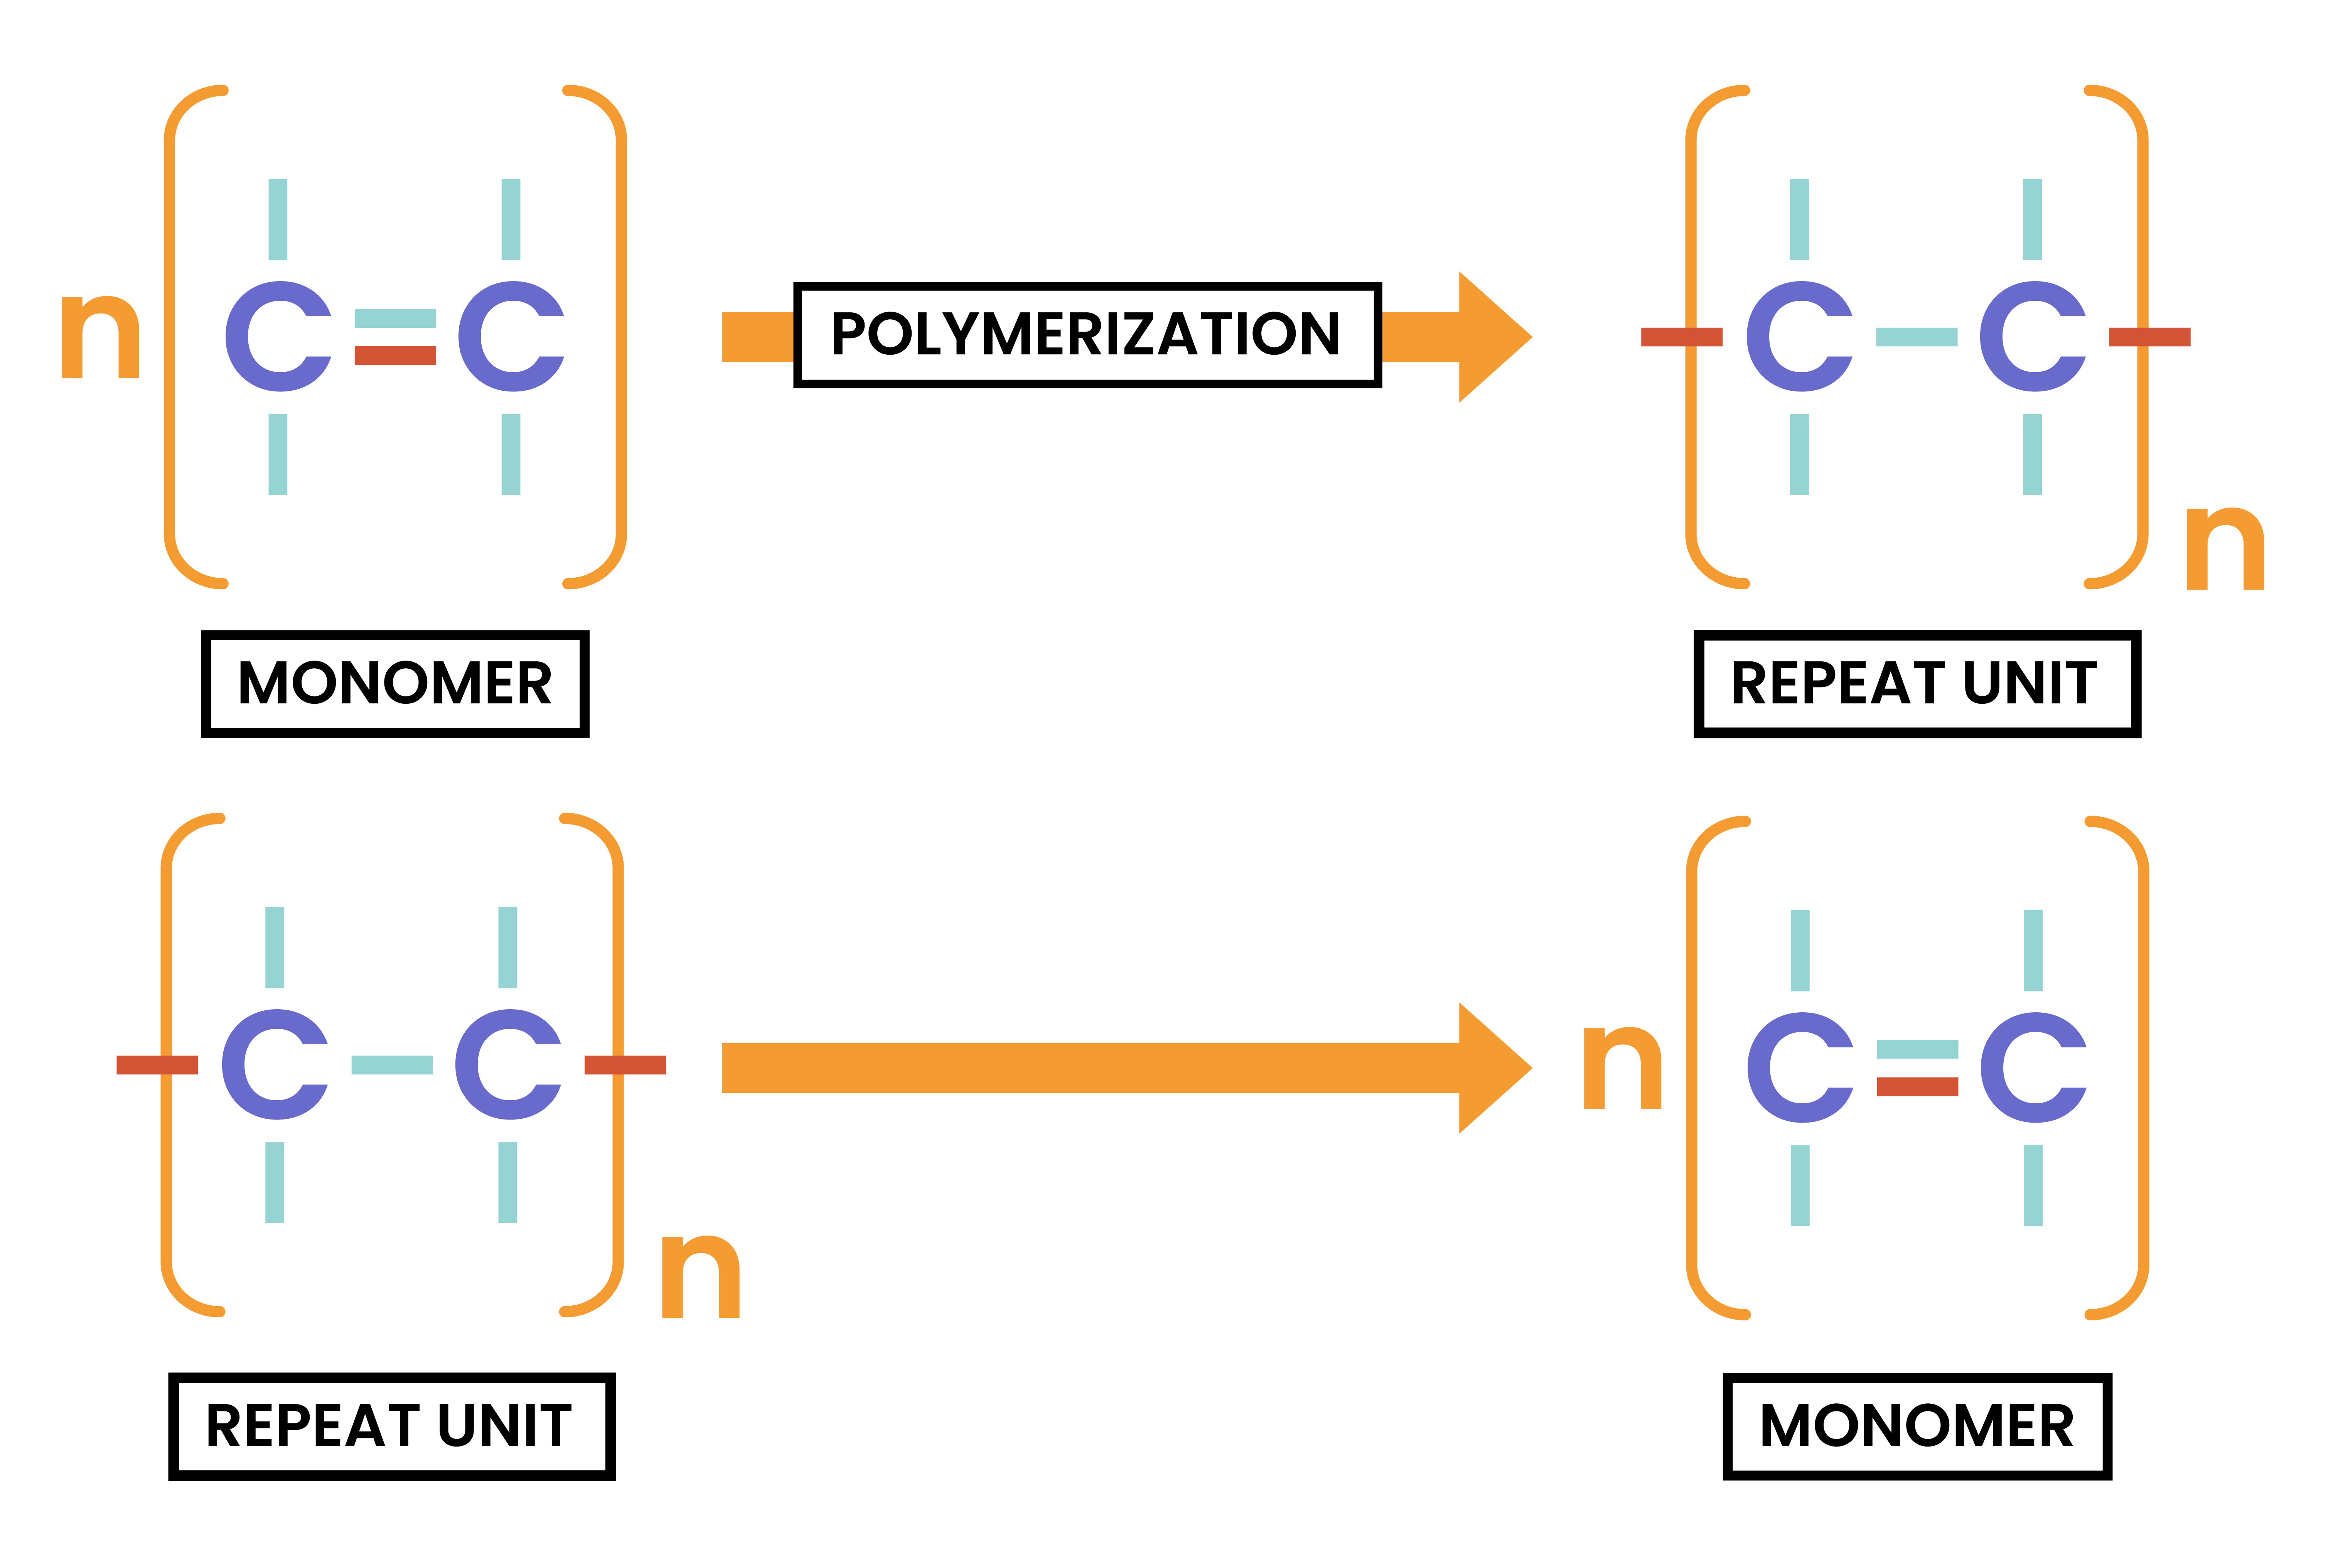 edexcel_igcse_chemistry_topic 28_synthetic polymers_003_monomer to repeat unit and repeat unit to monomer diagram